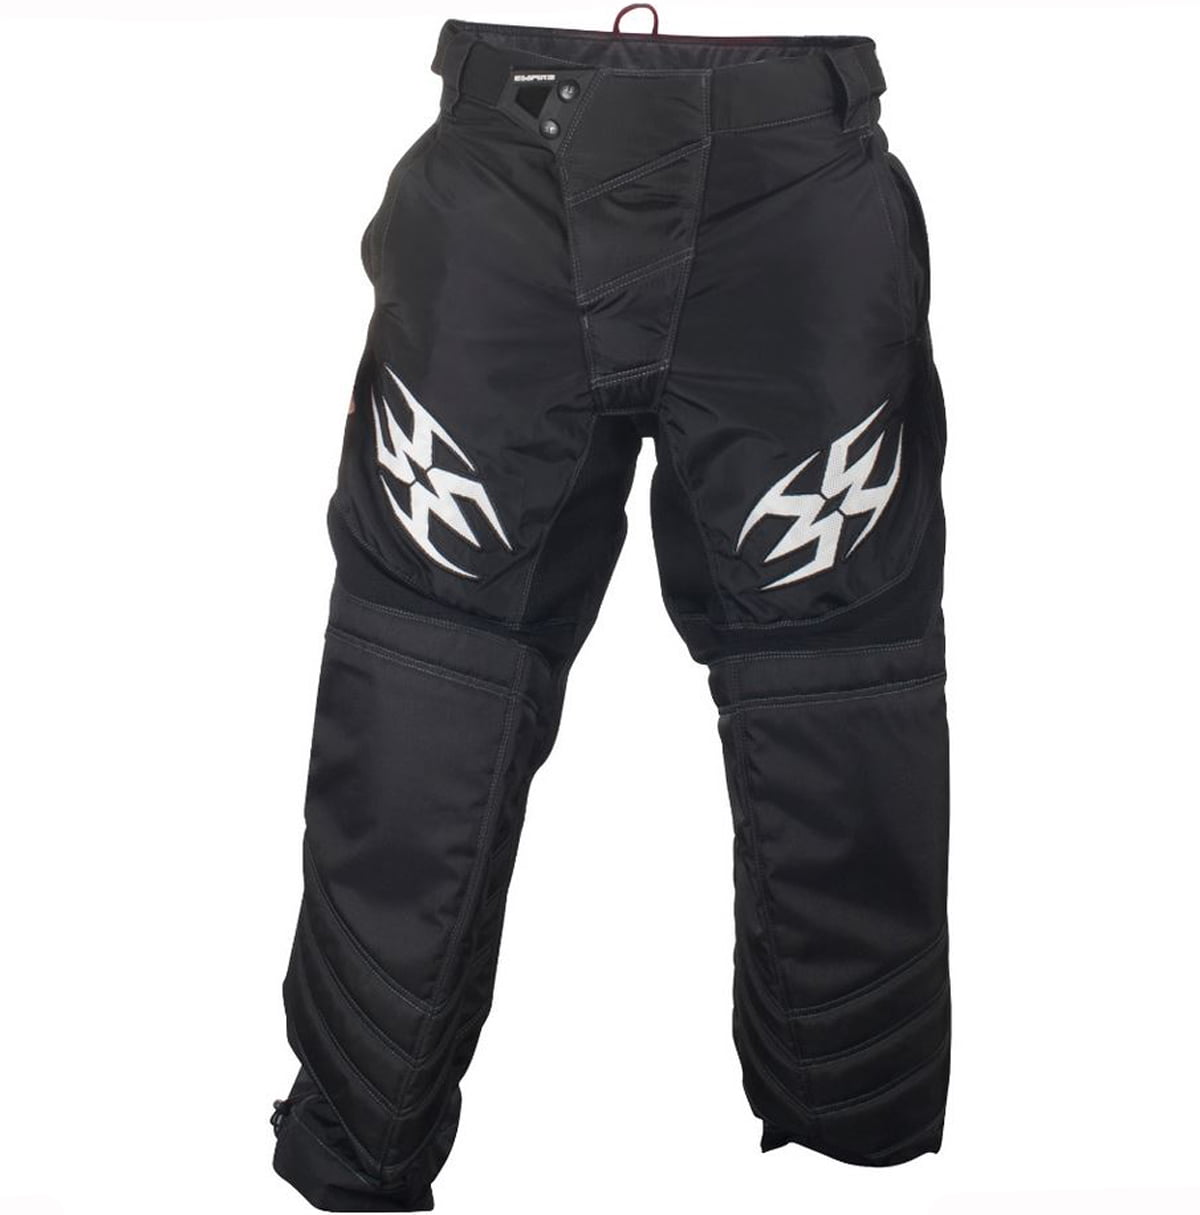 Small Black Grey Size Empire Grind Paintball Pants 